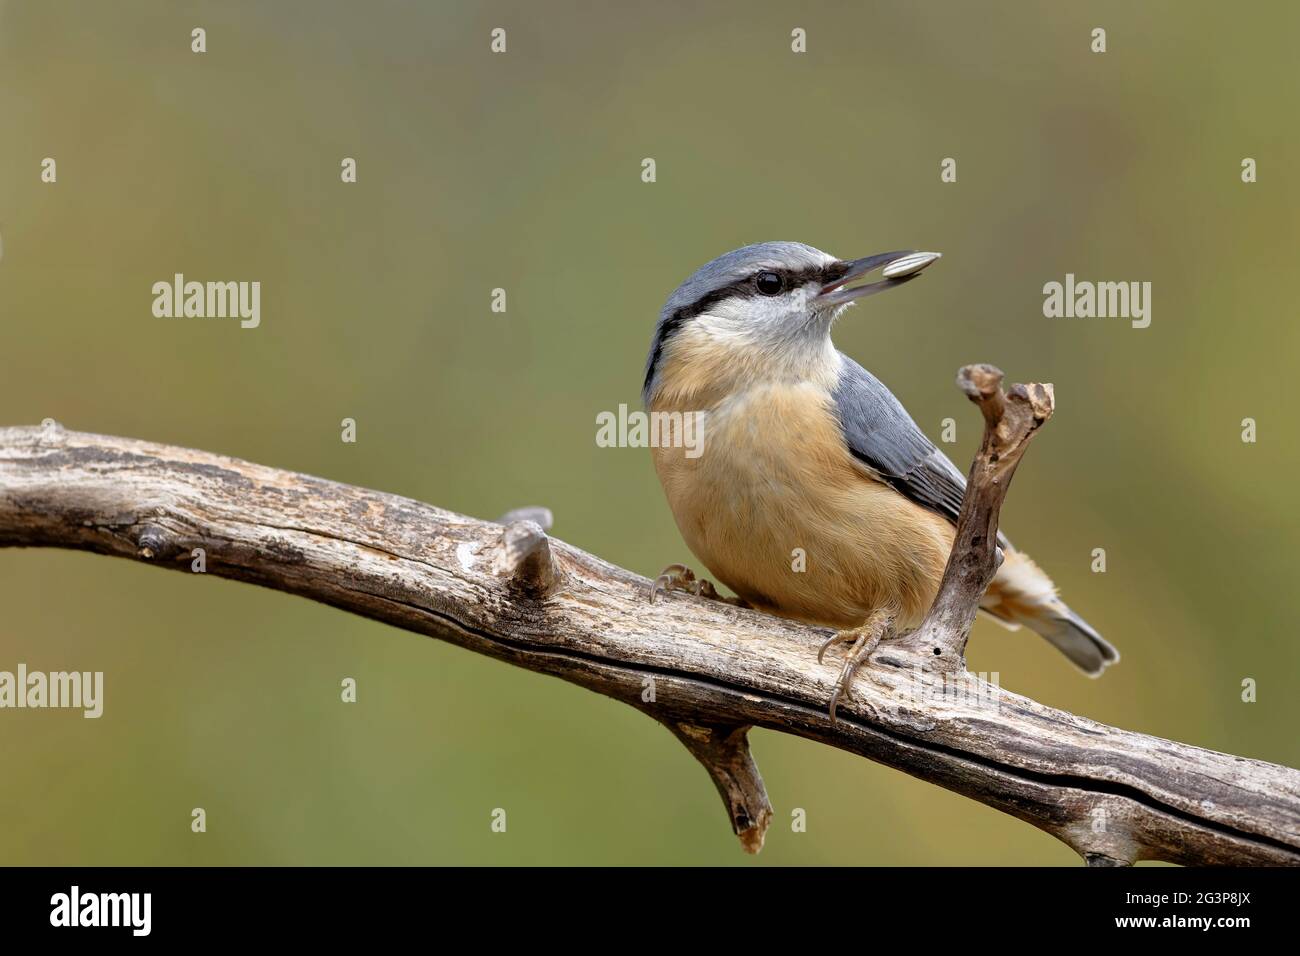 Nuthatch with sunflower seed Stock Photo